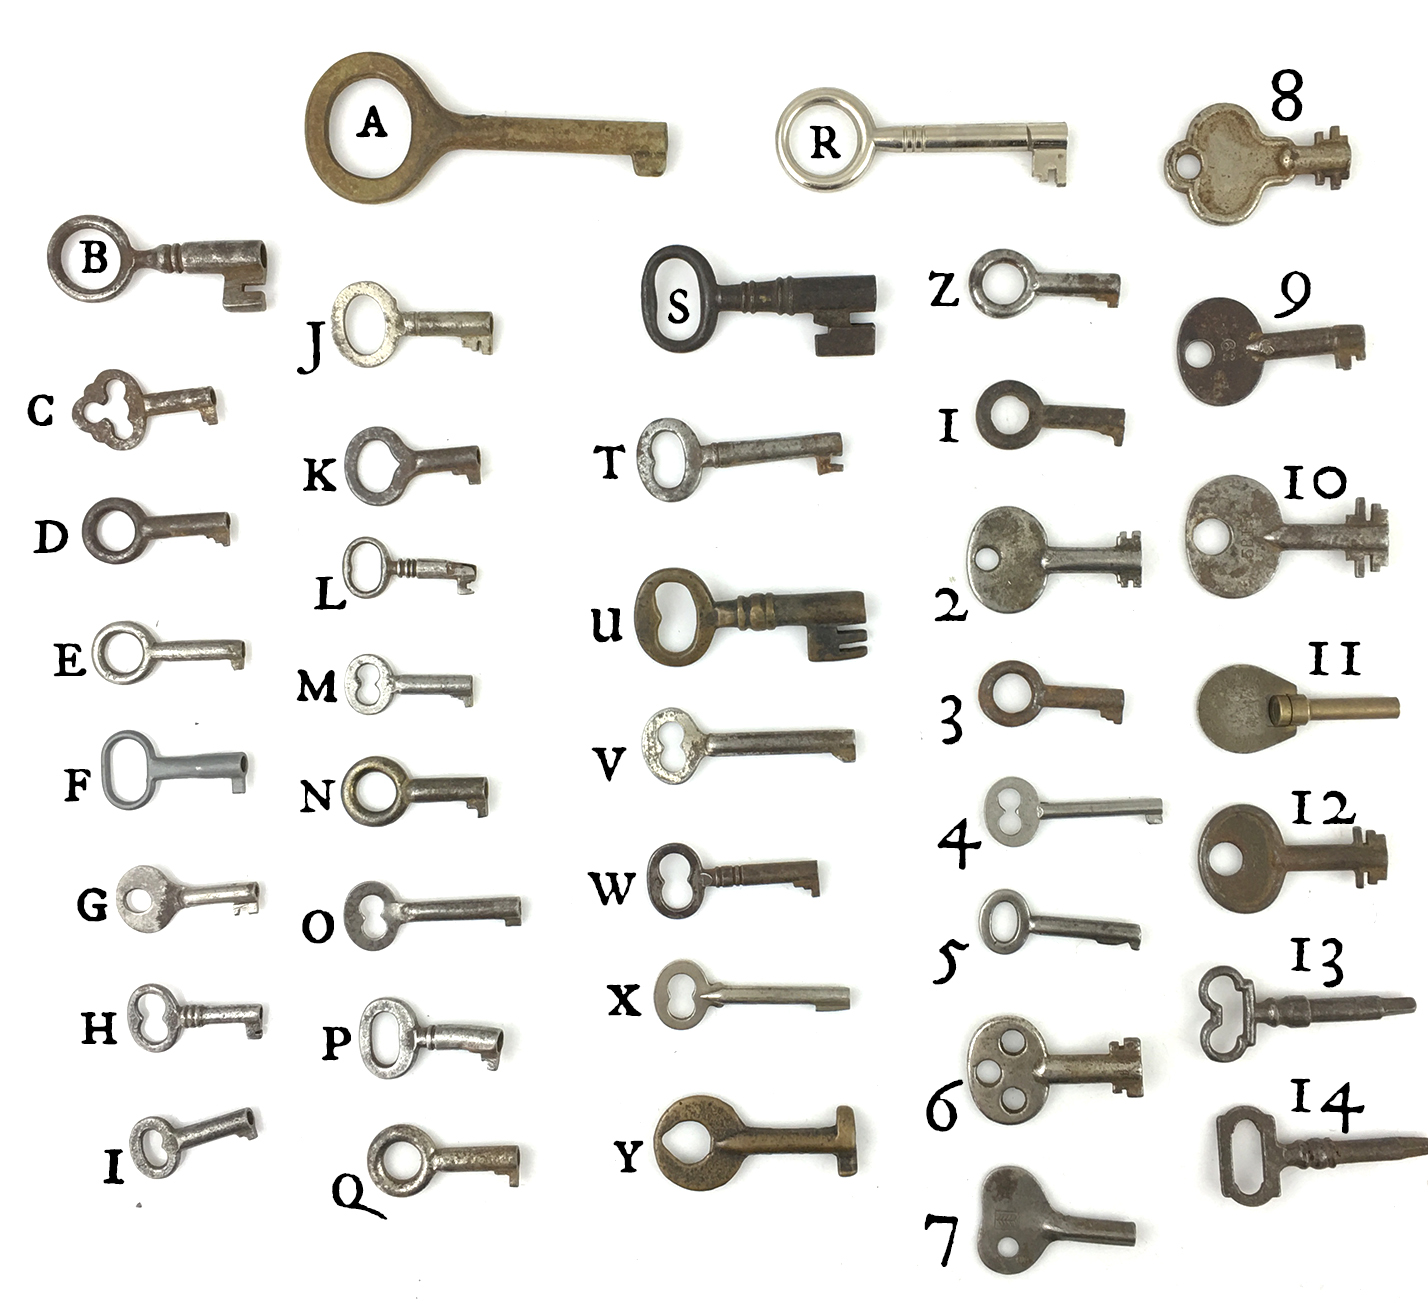 REPLACEMENT KEY FOR NEW AND OLD LOCKS  B1937 